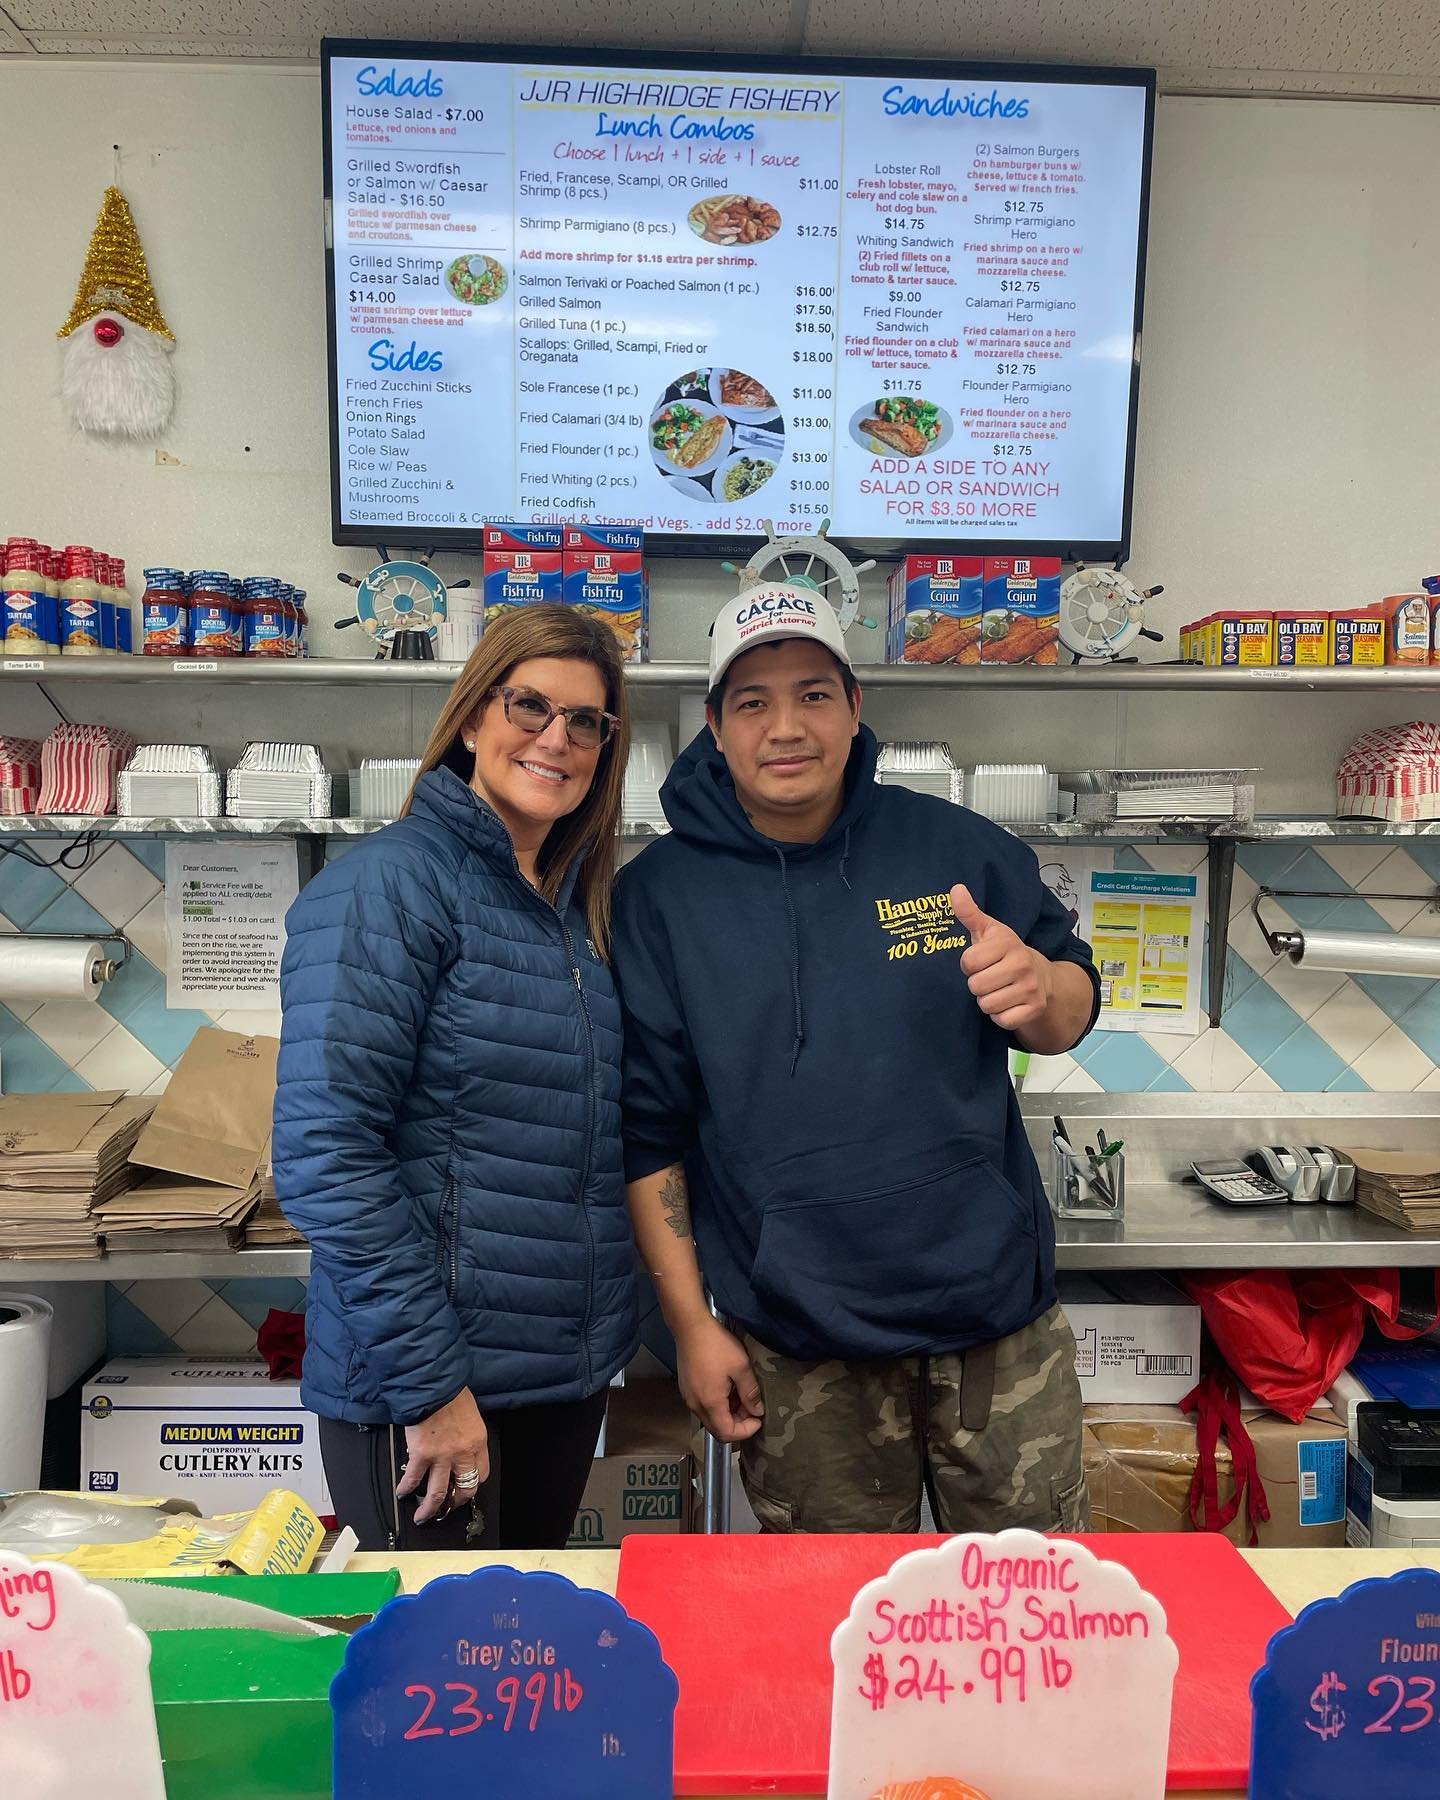 Highridge Fishery. Providing some of the best, freshest seafood in all of Westchester since 1980! IYKYK - and if you don&rsquo;t, try them!

Proud to have their support! 
#choosinsusan
#cacaceforda